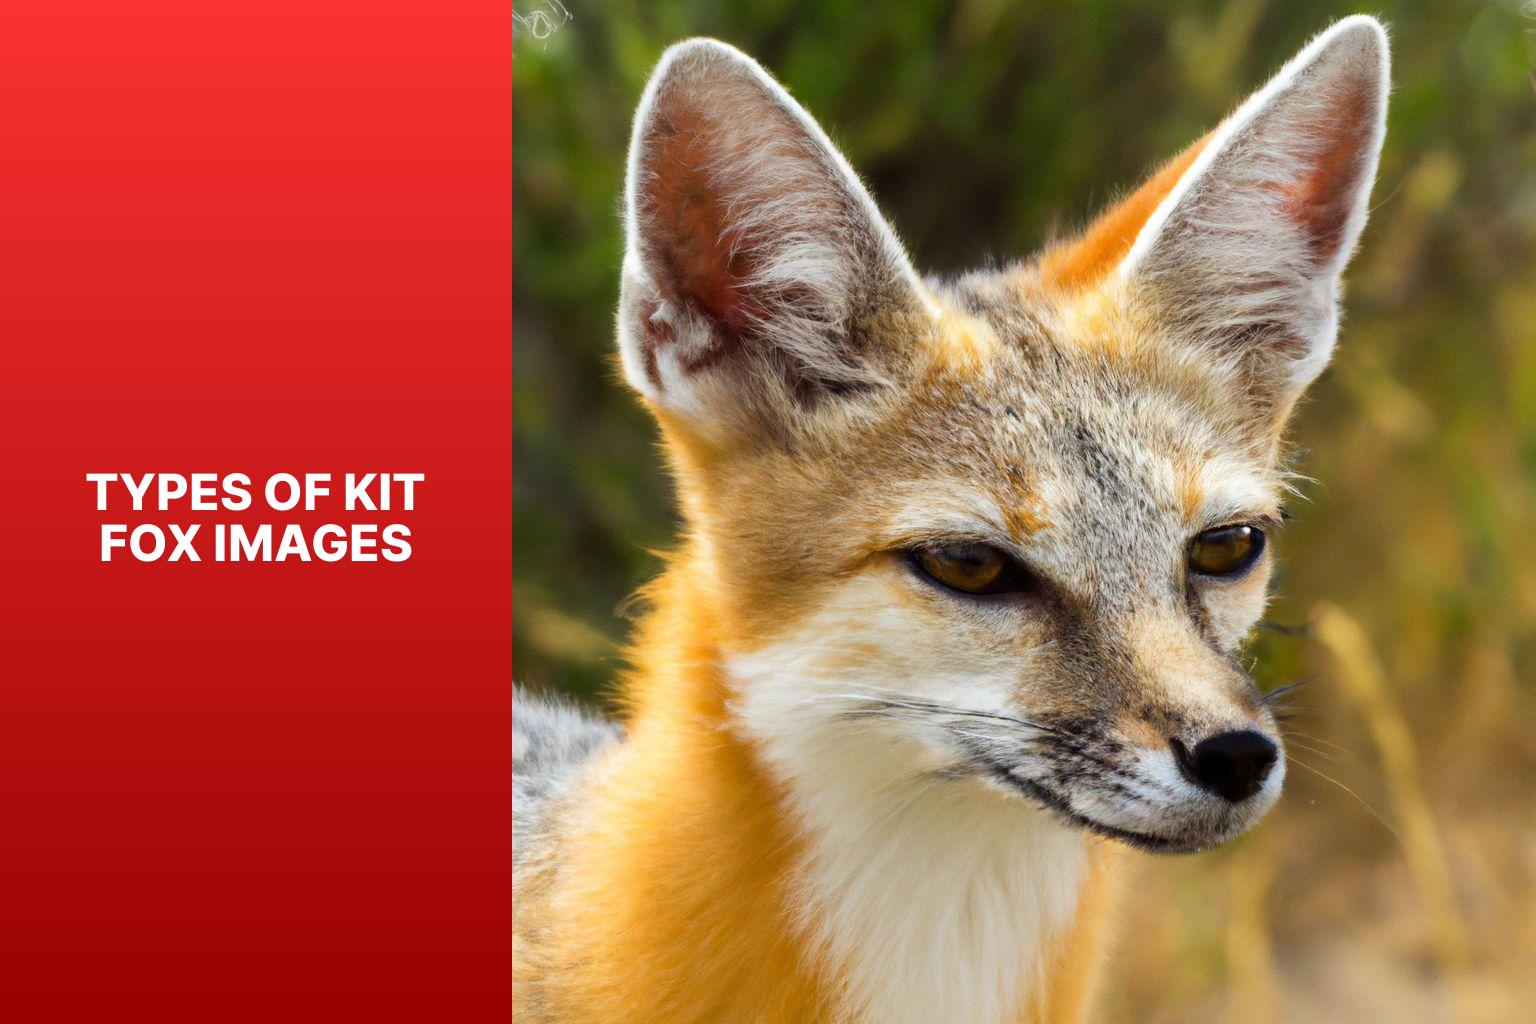 Types of Kit Fox Images - Kit Fox Images 